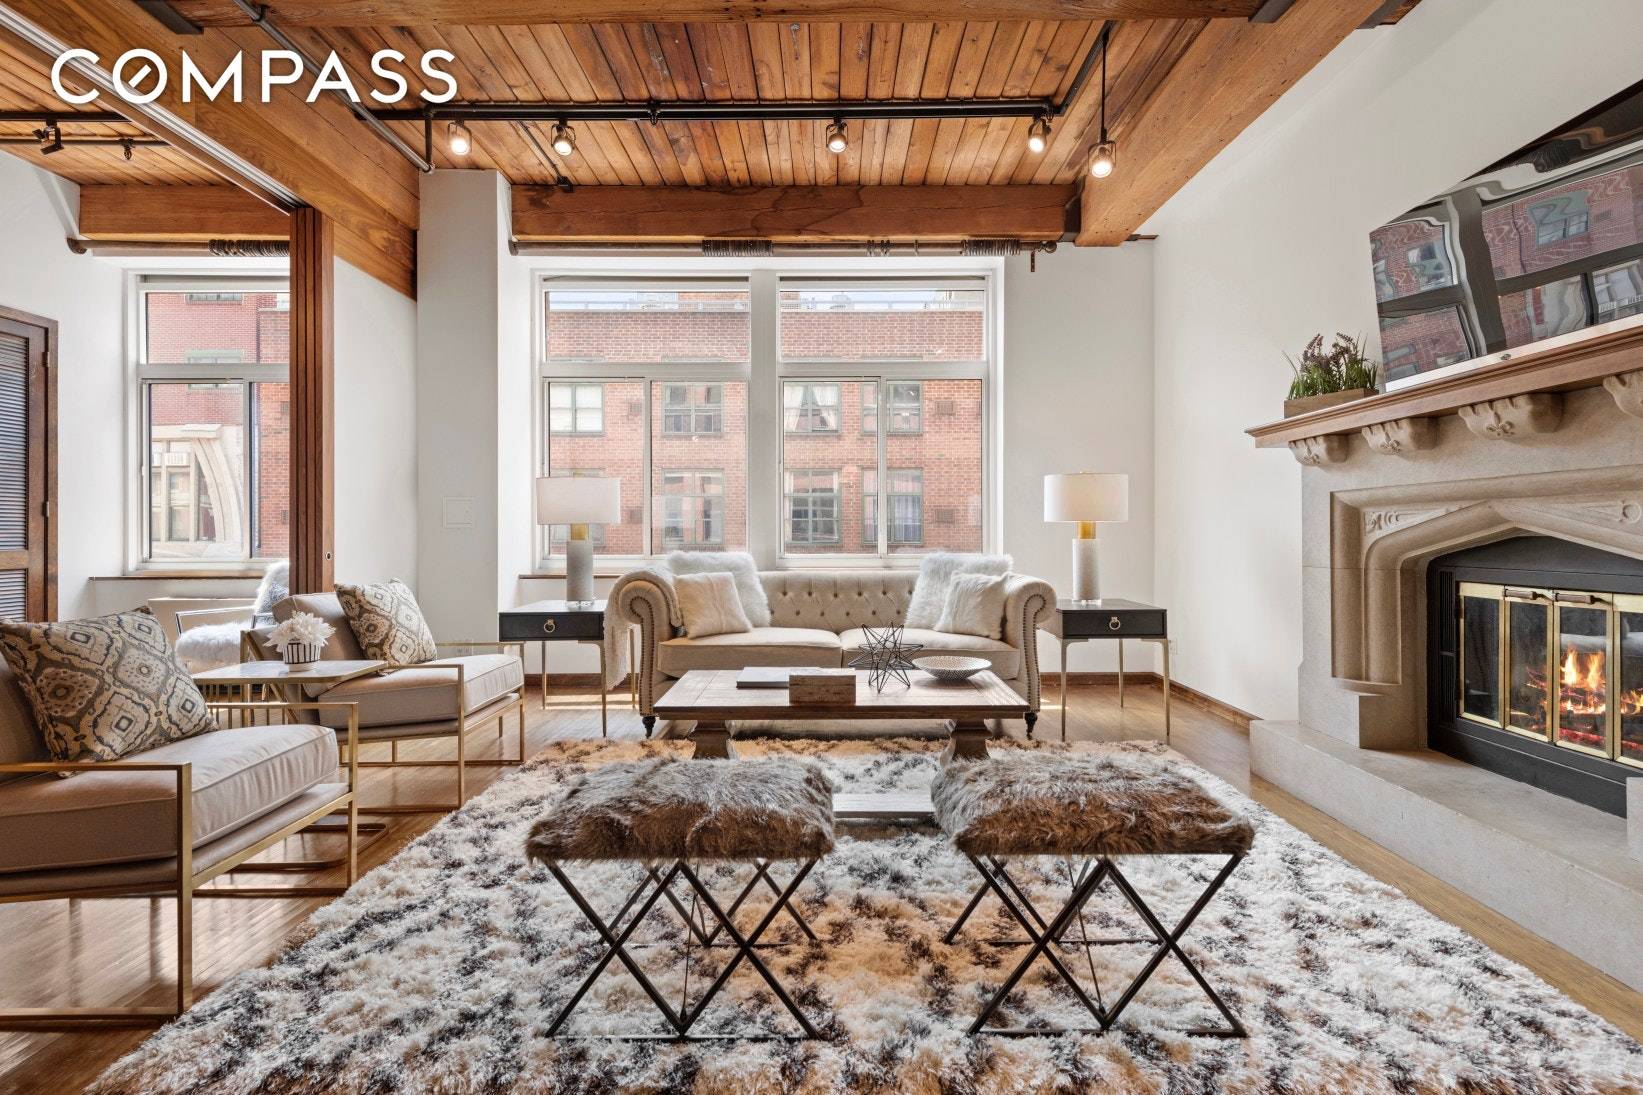 A once converted 1920's Brewery, this boutique Gramercy Park condominium exudes an impeccably crafted floor plan, flawless flow and functional design, while melding all of the loft's interior original elements ...